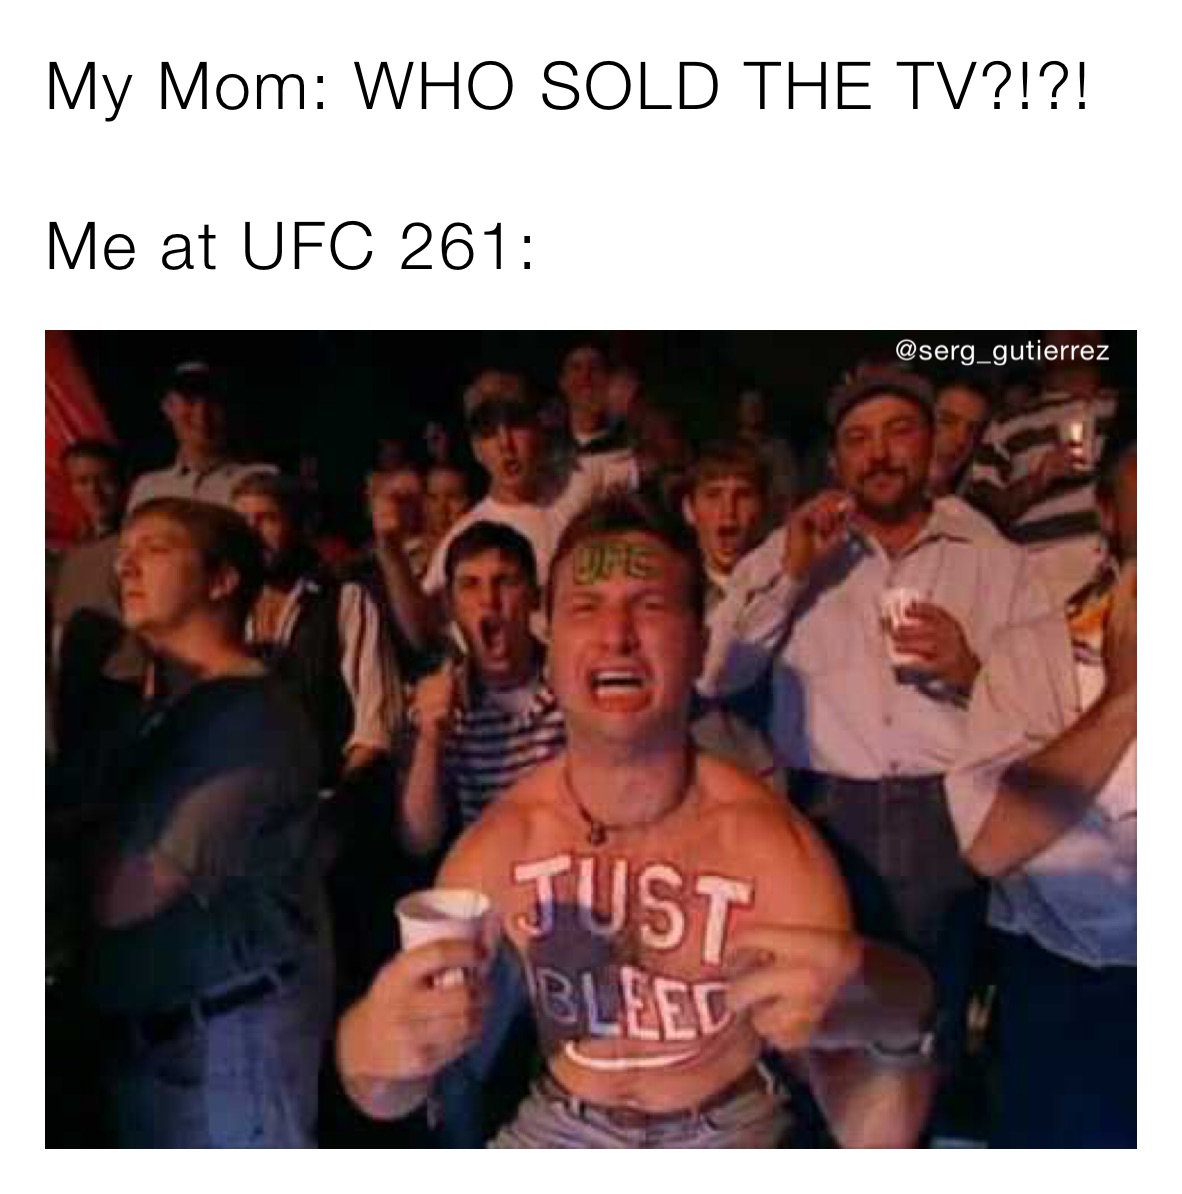 My Mom: WHO SOLD THE TV?!?!

Me at UFC 261: